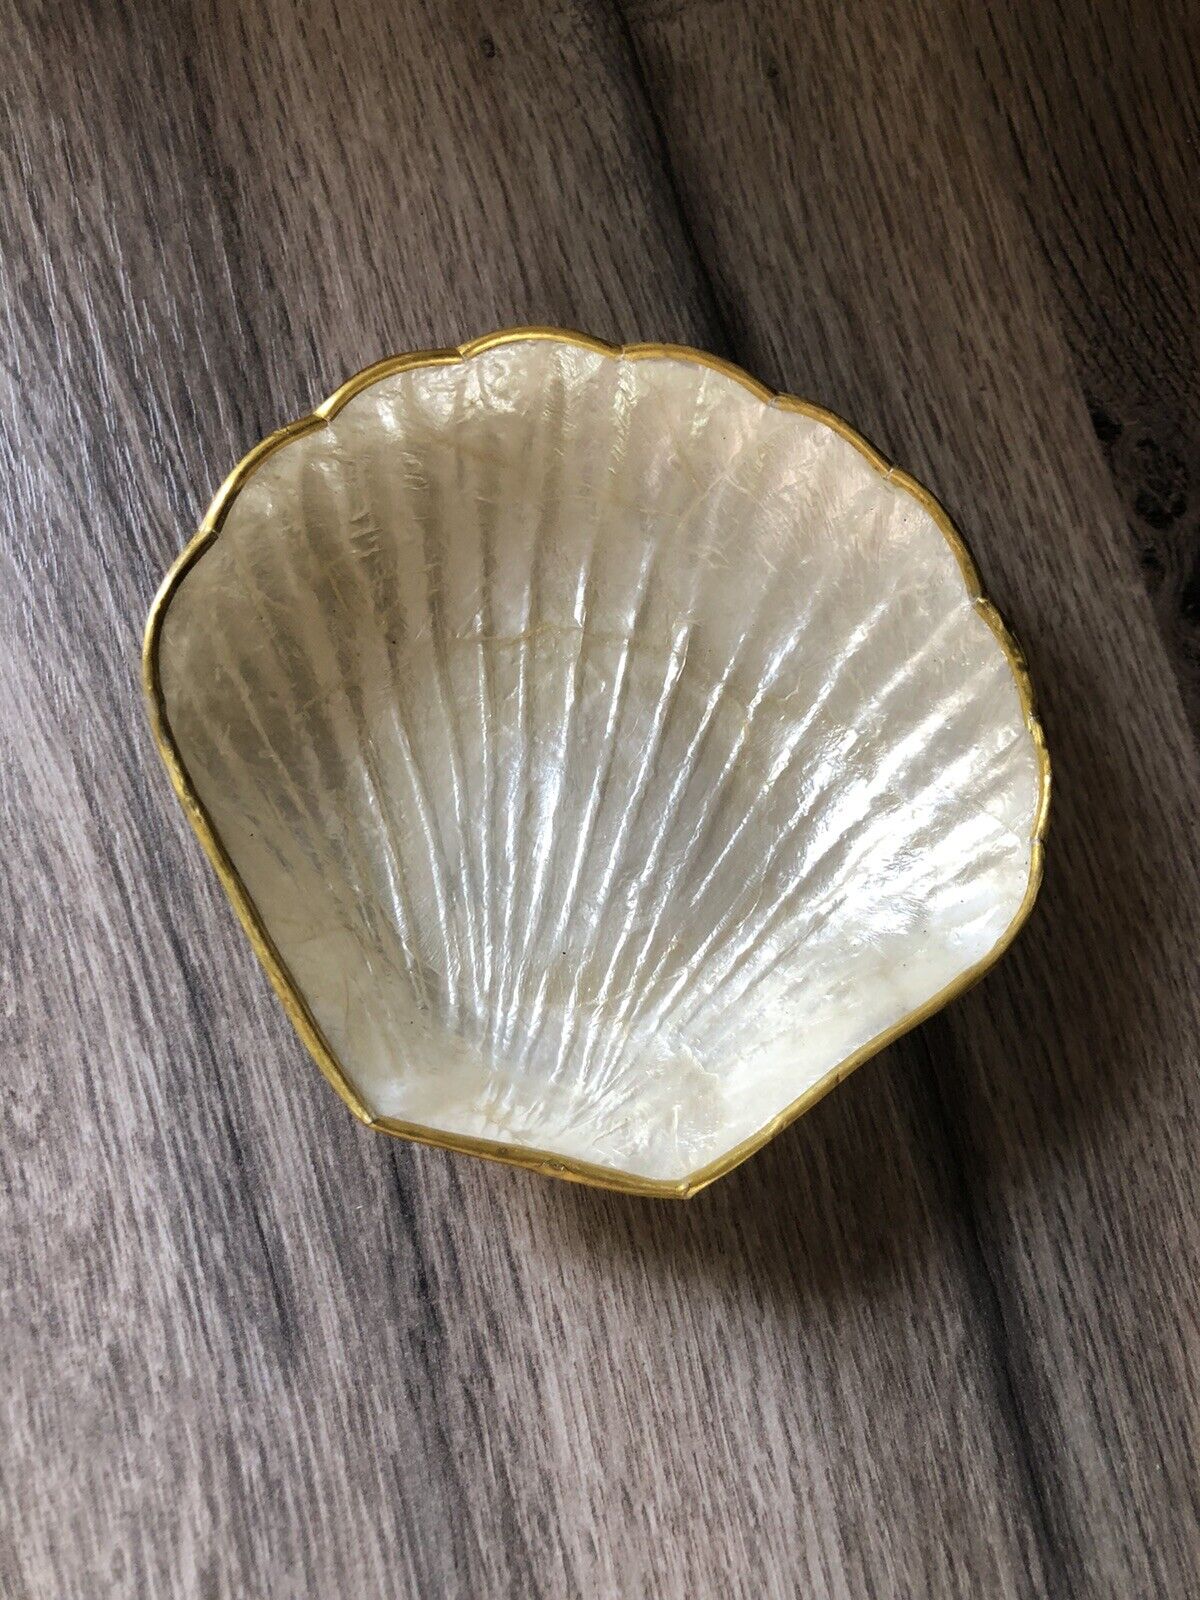 Capiz Shell Snack Dishes Nut Candy Party Bowls Trinket Dish Gold Rim